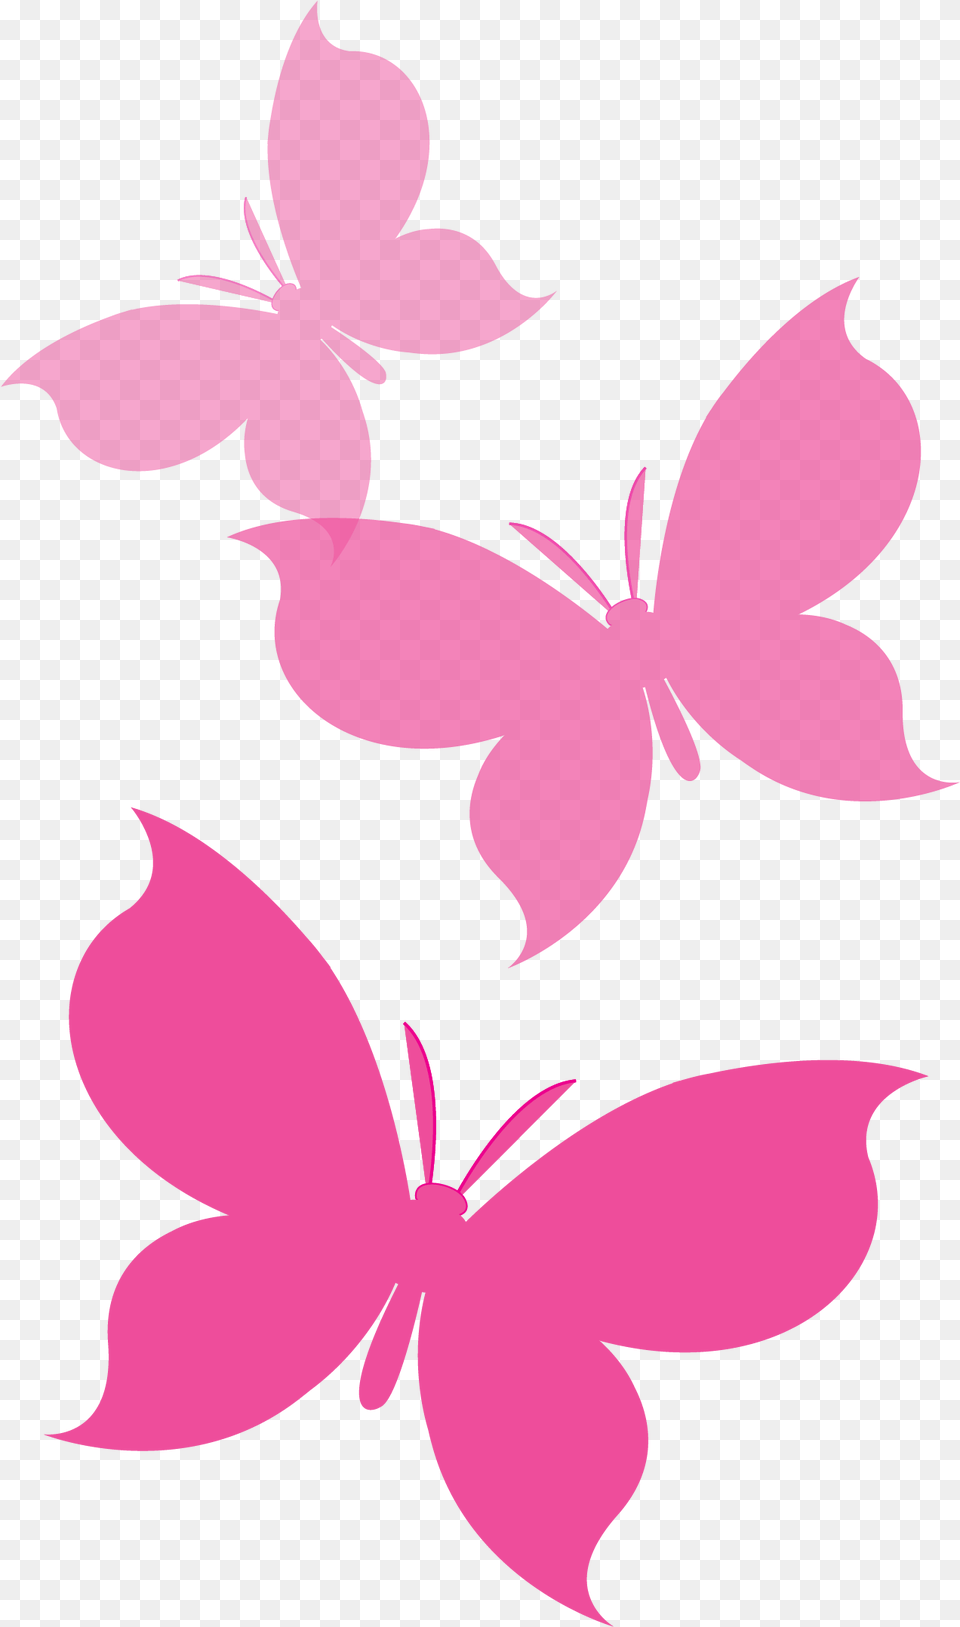 Our Promise Group Of Pink Butterflies Pink Butterfly, Flower, Plant, Art, Floral Design Png Image